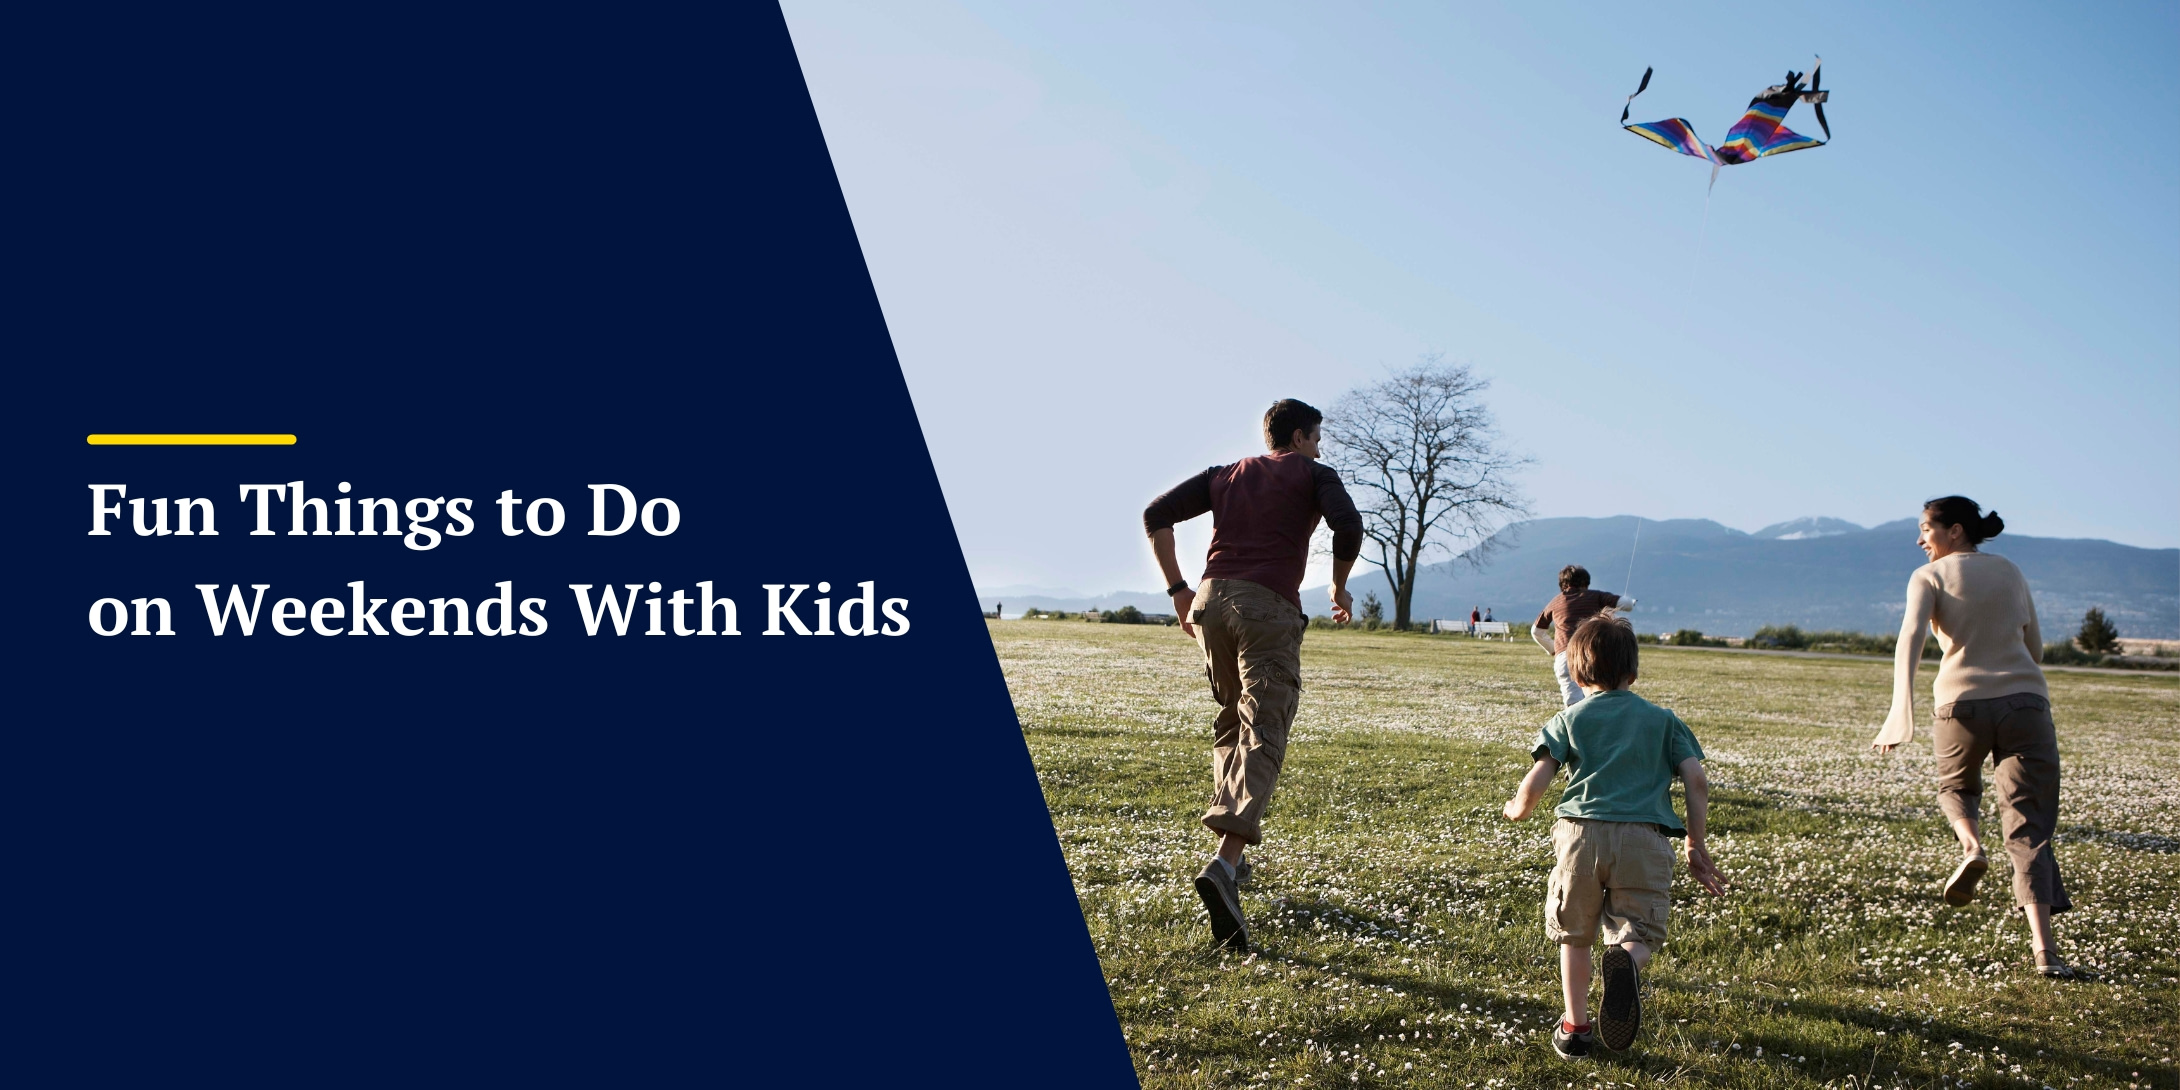 Fun Things to Do on Weekends With Kids